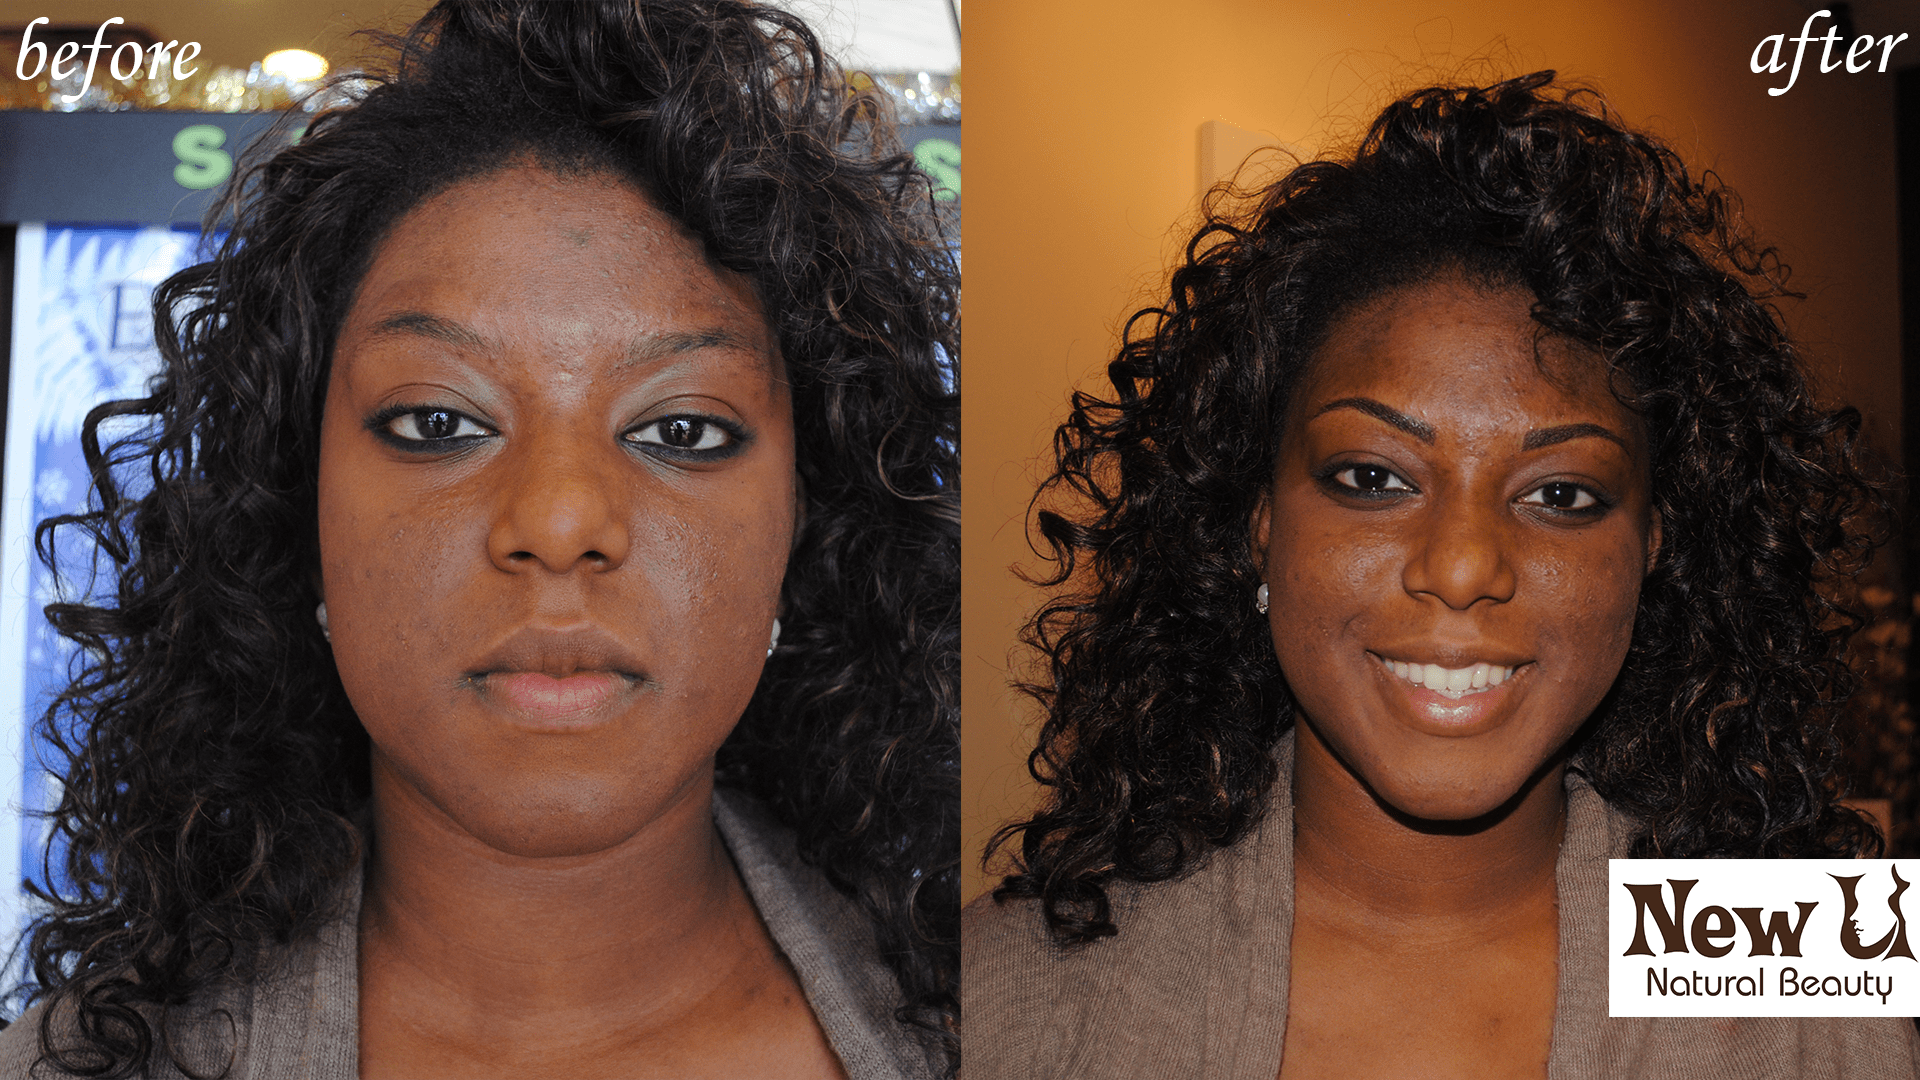 Permanent Makeup 2 Las Vegas Before and After